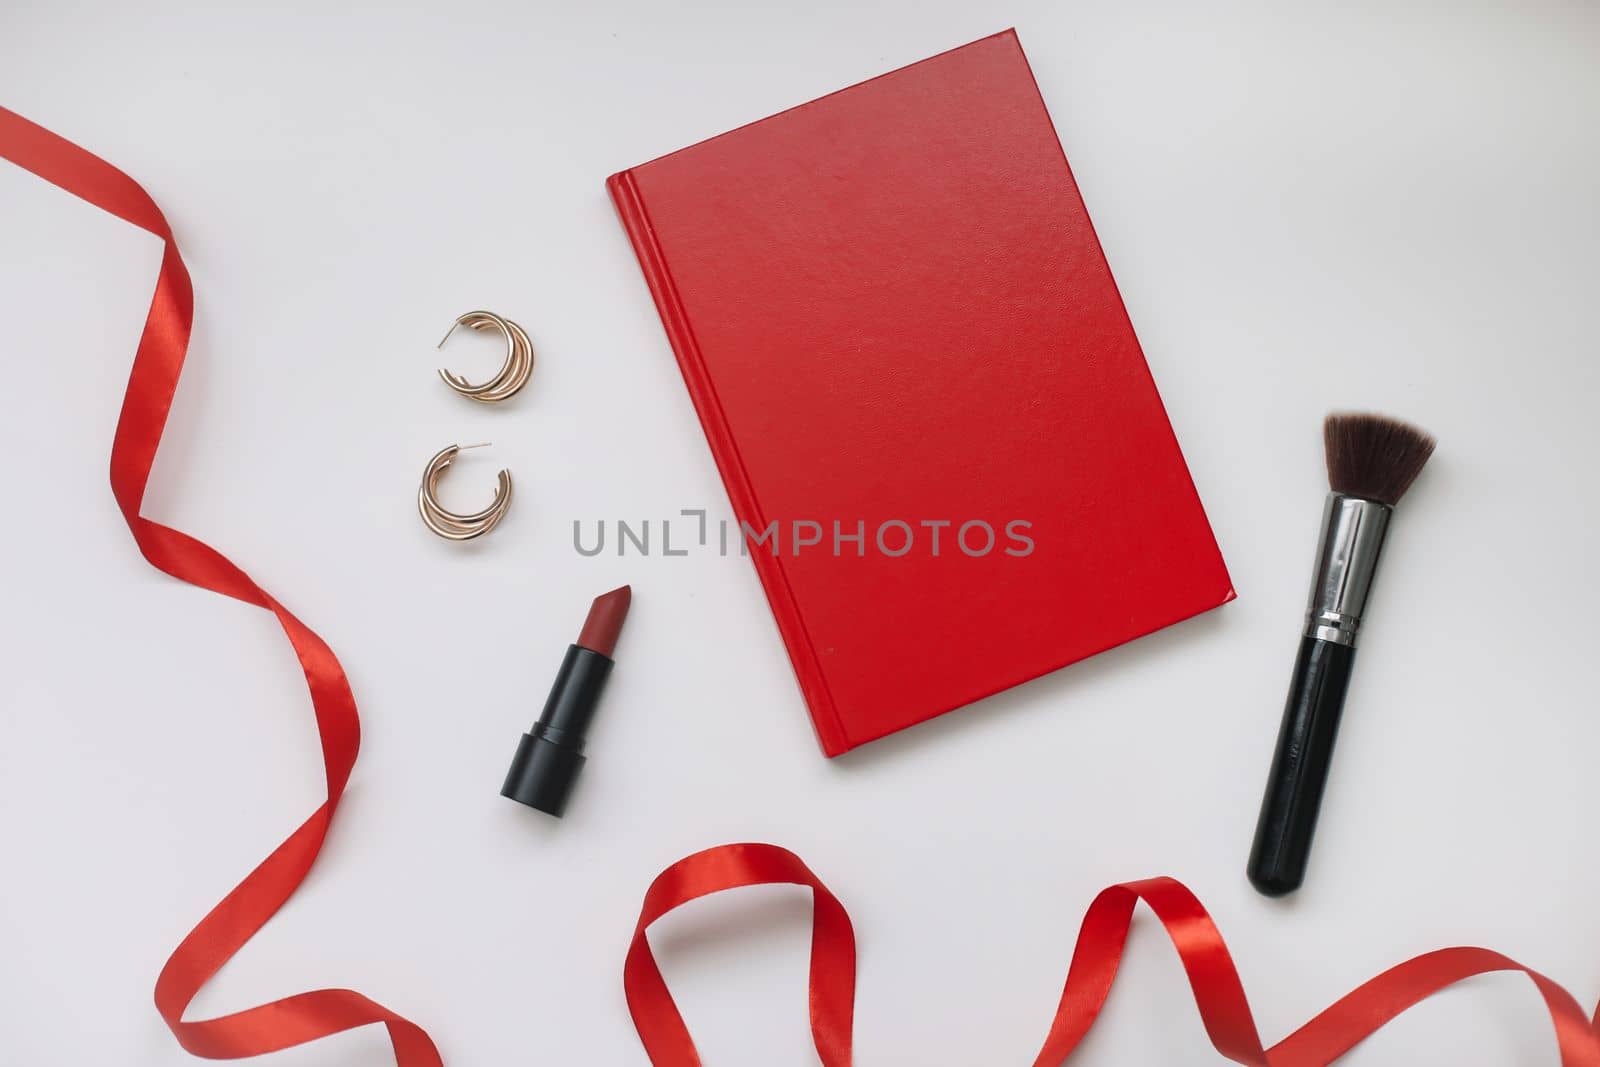  Concept Women's Day, Valentines Day, March 8. Lipsticks, cosmetic makeup products and accessories flatlay top view.  by paralisart